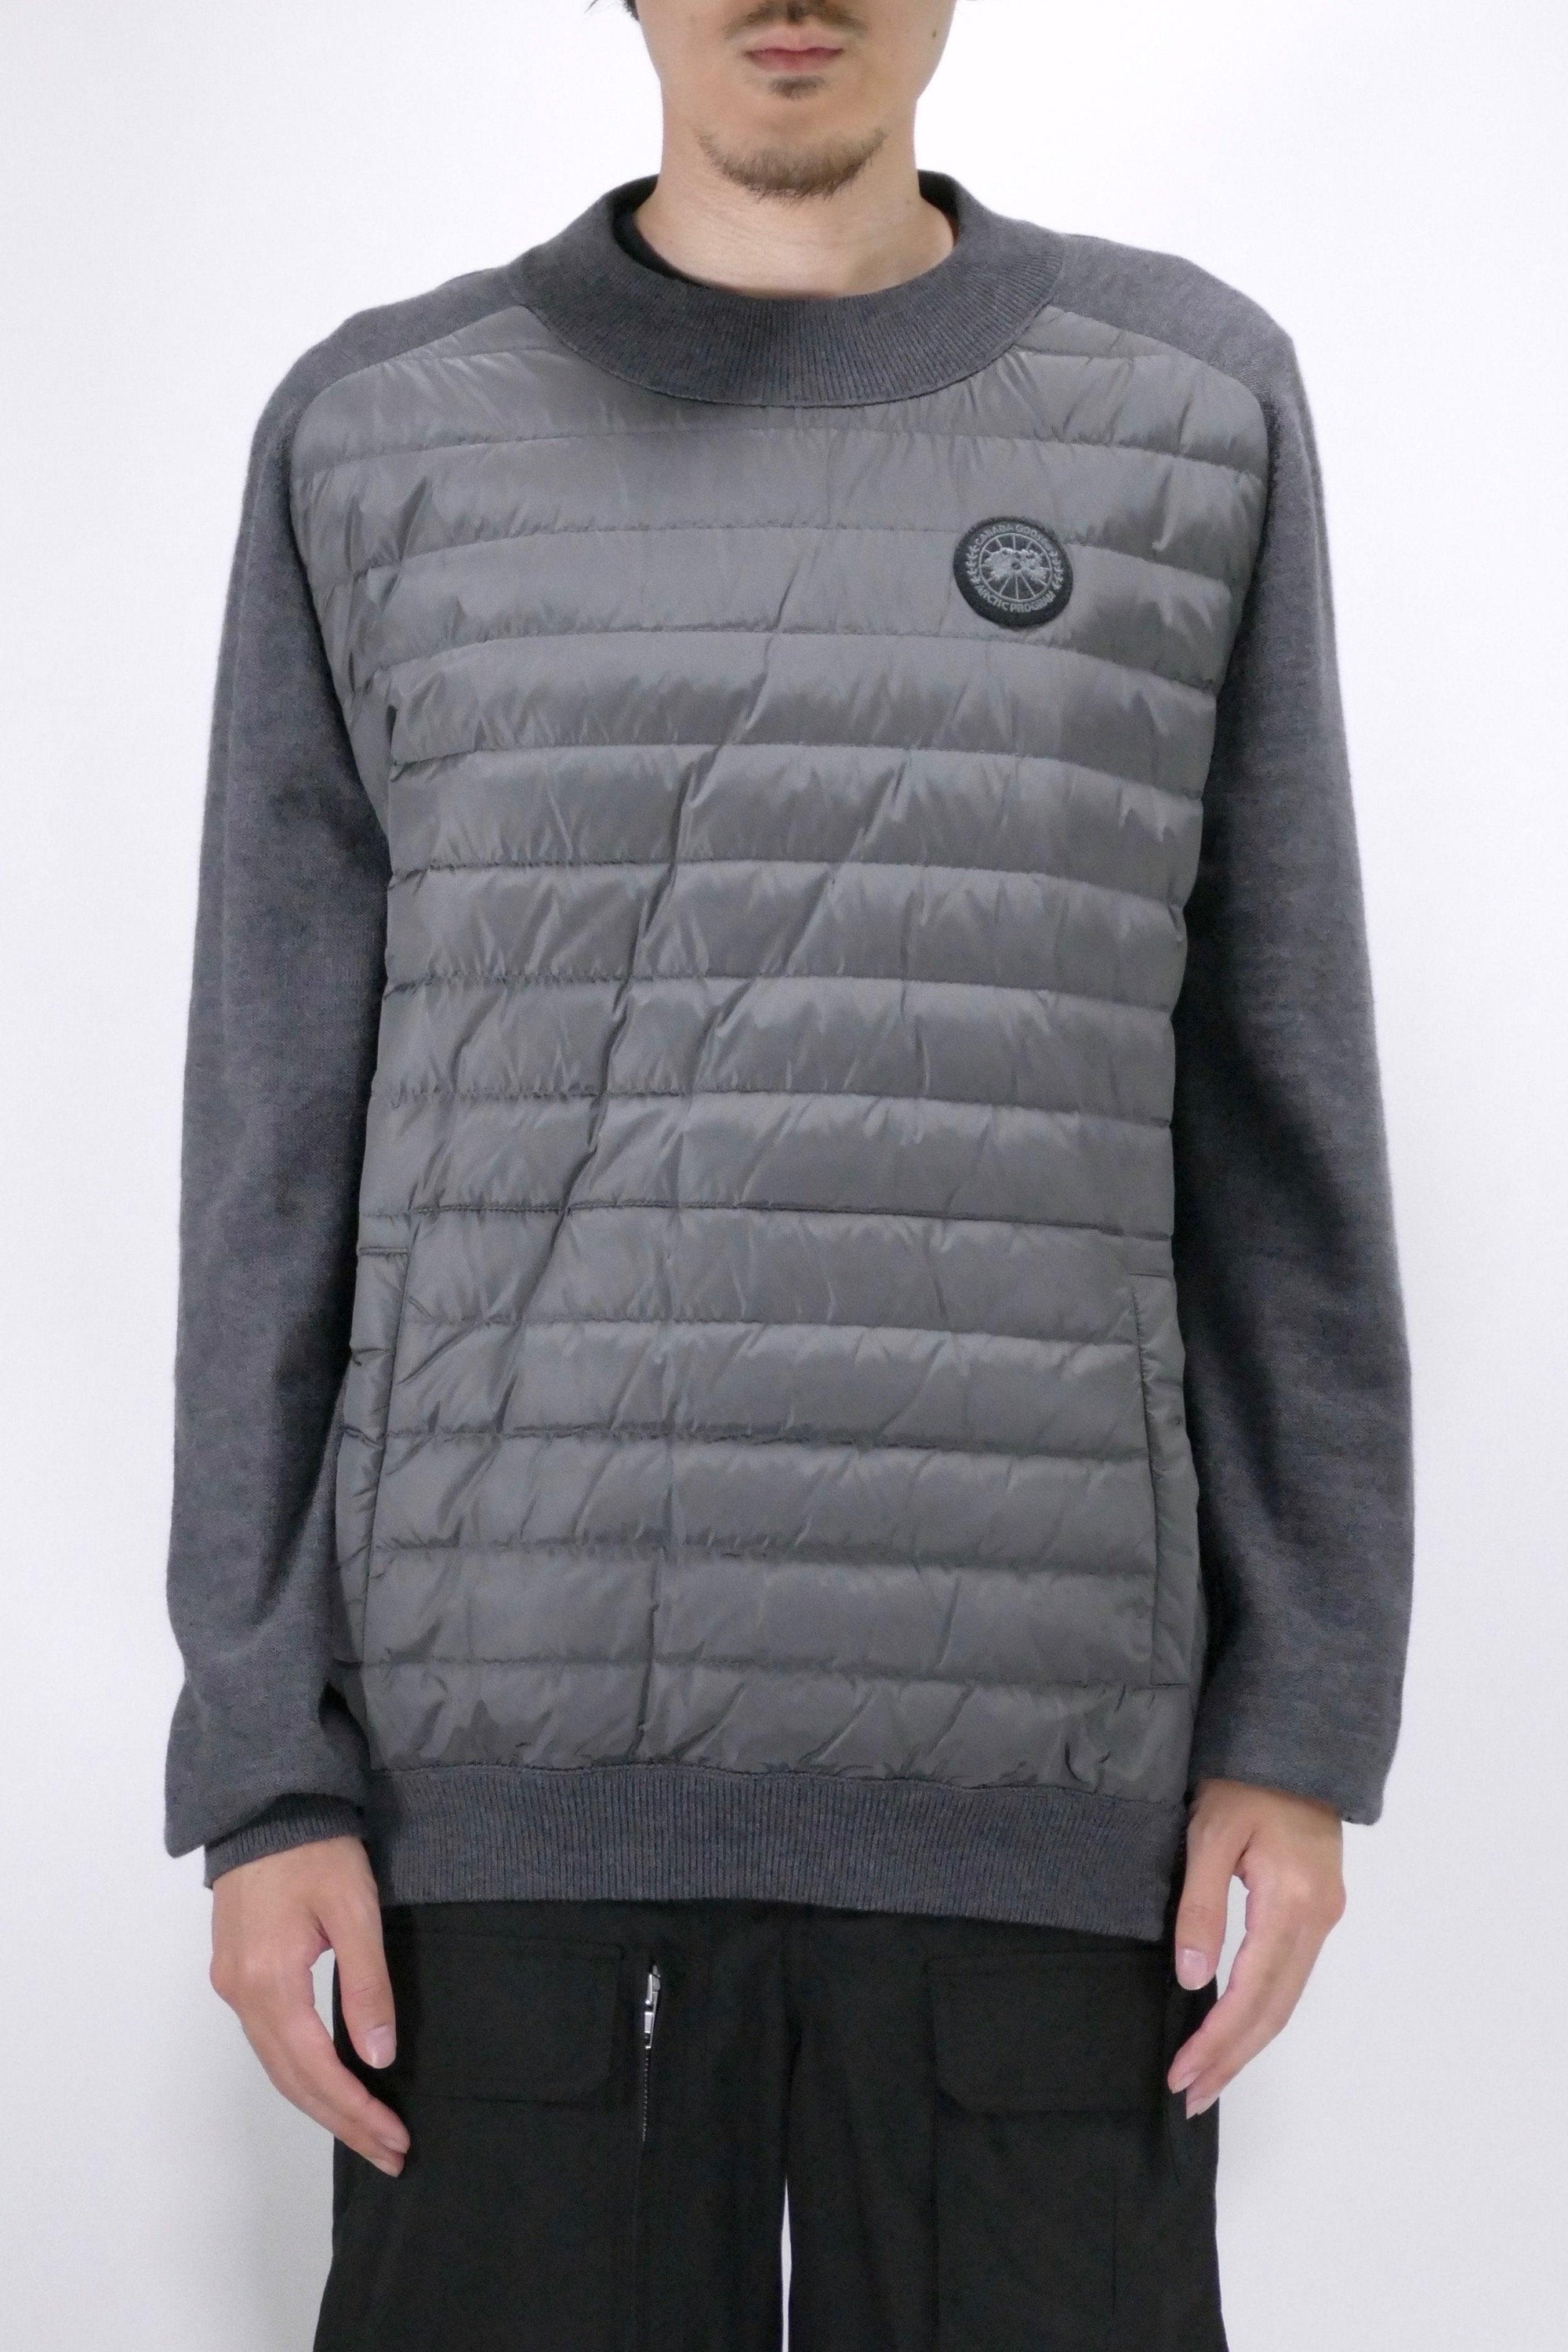 Canada Goose Mens Knit Hybridge Pullover Reversible Iron Grey - Due West